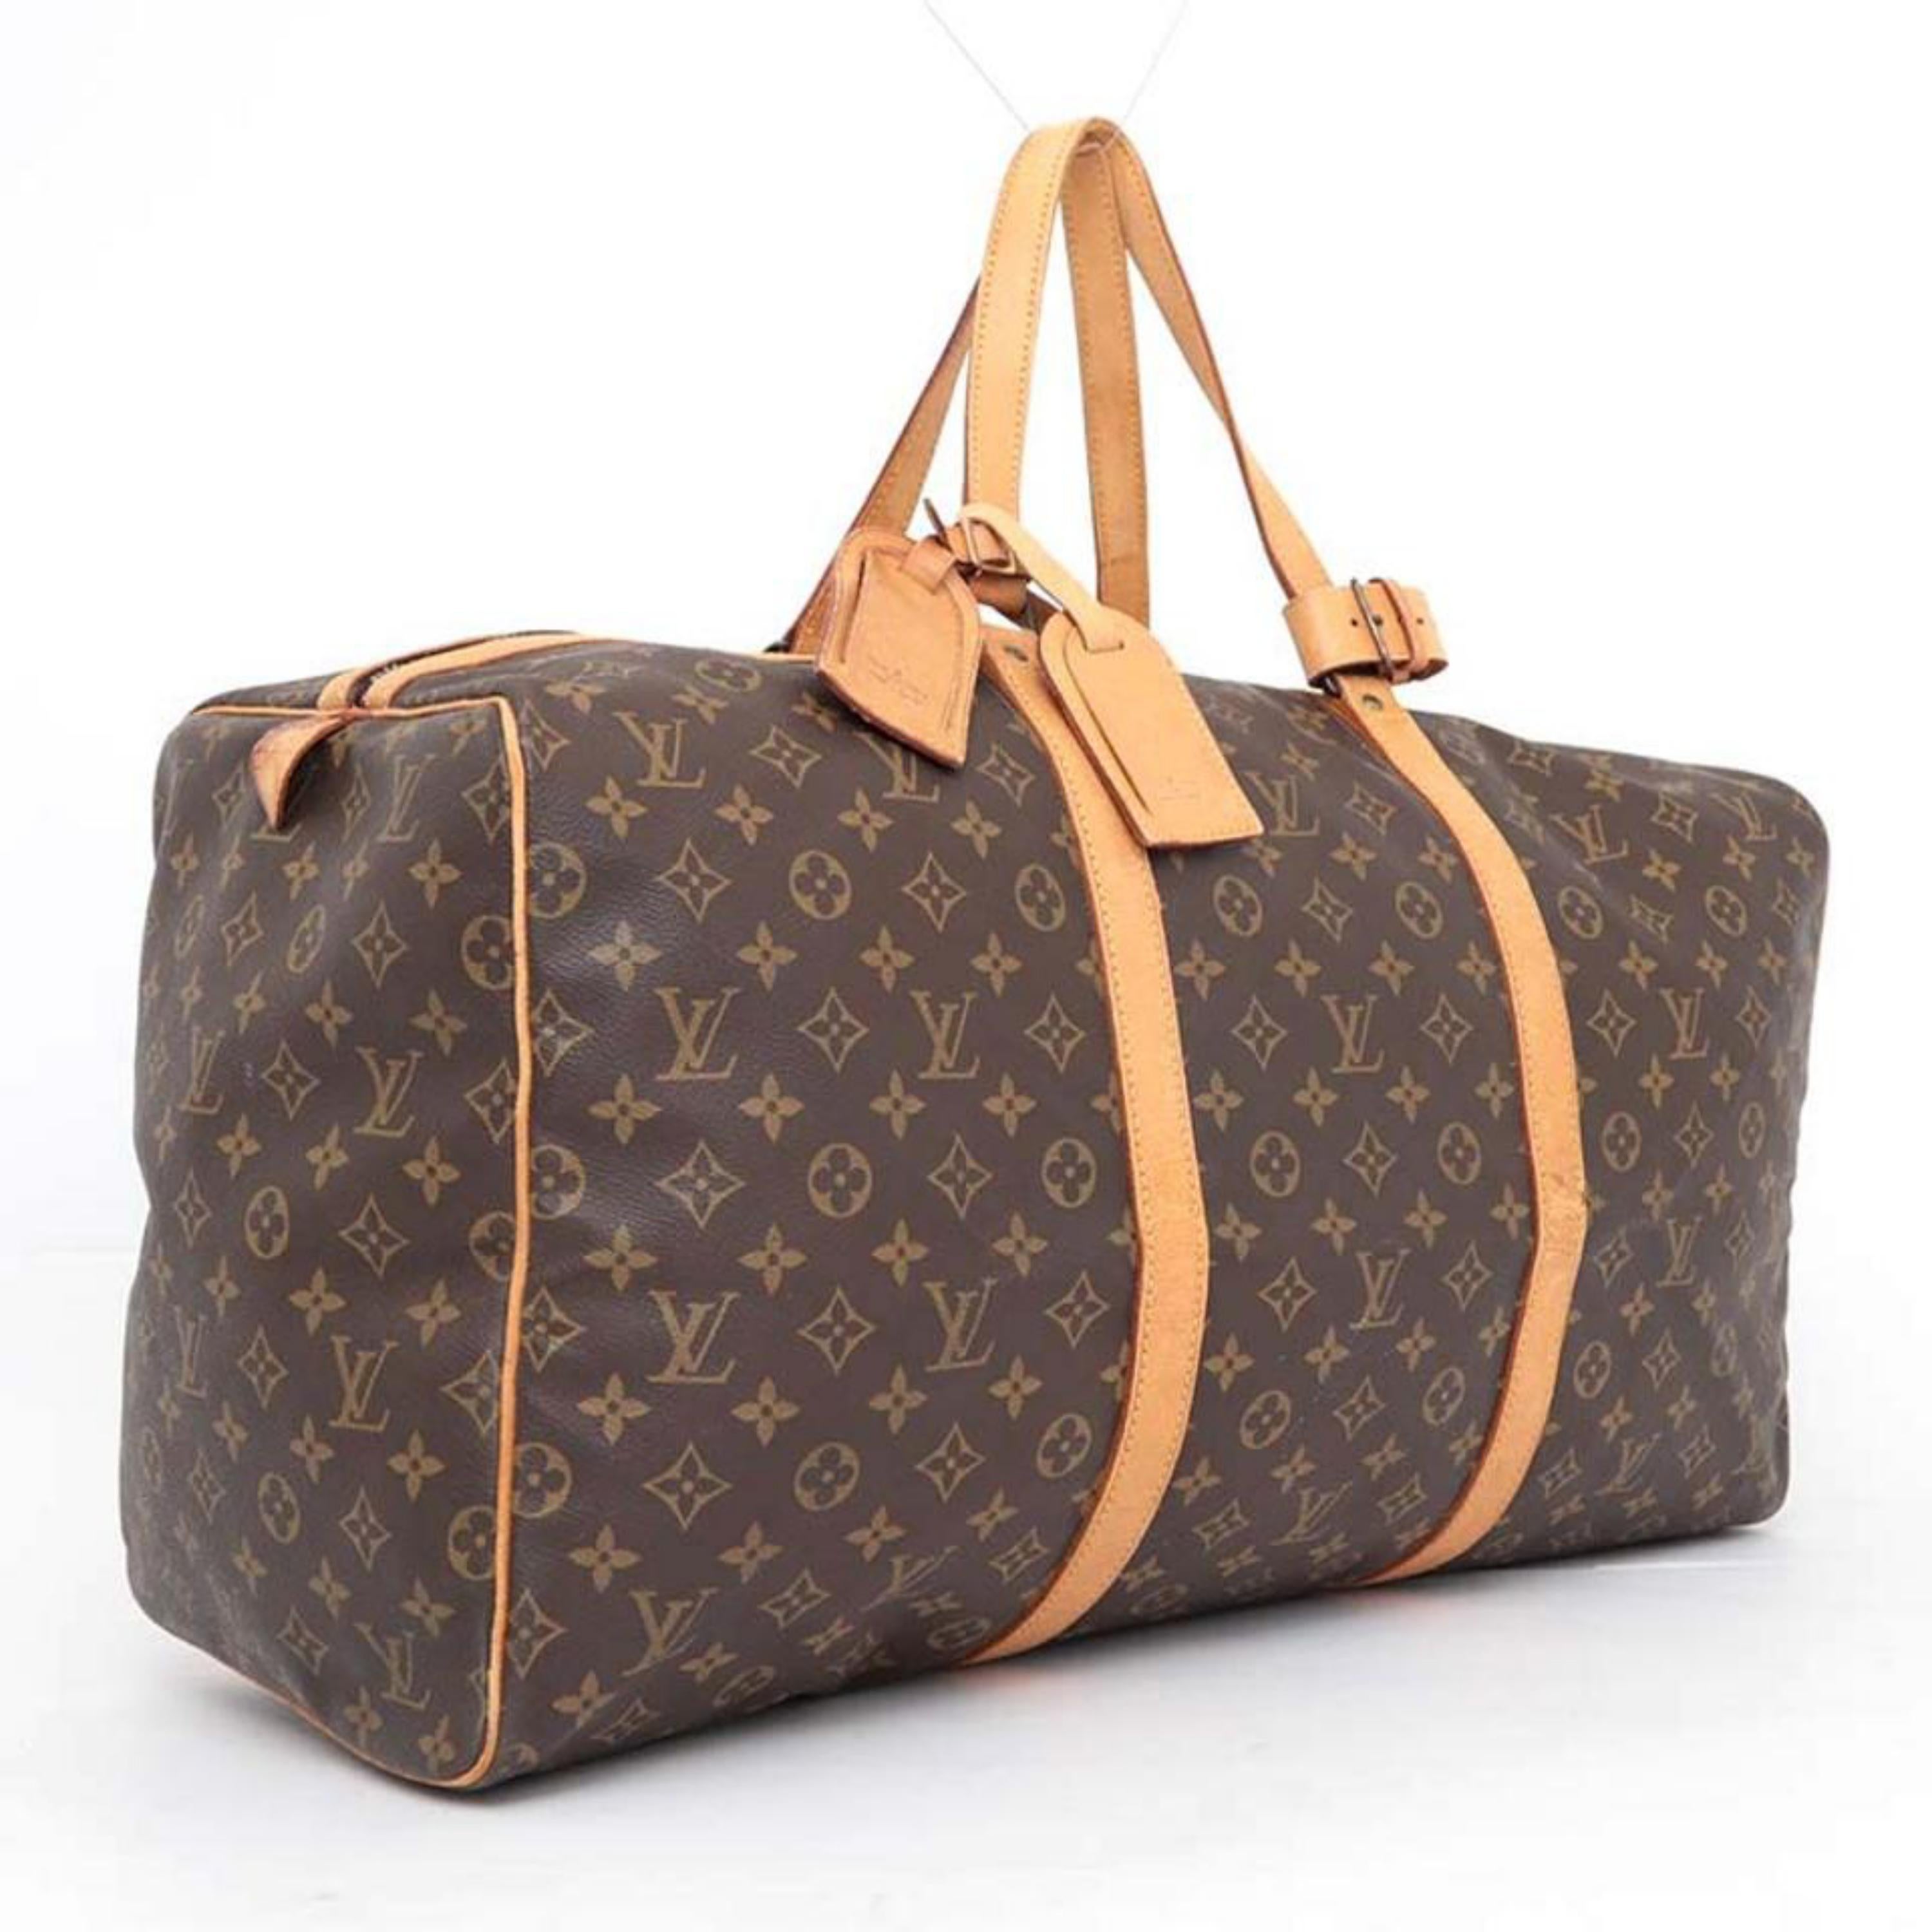 Louis Vuitton Sac Souple Monogram 55 230343 Coated Canvas Weekend/Travel Bag In Good Condition For Sale In Forest Hills, NY